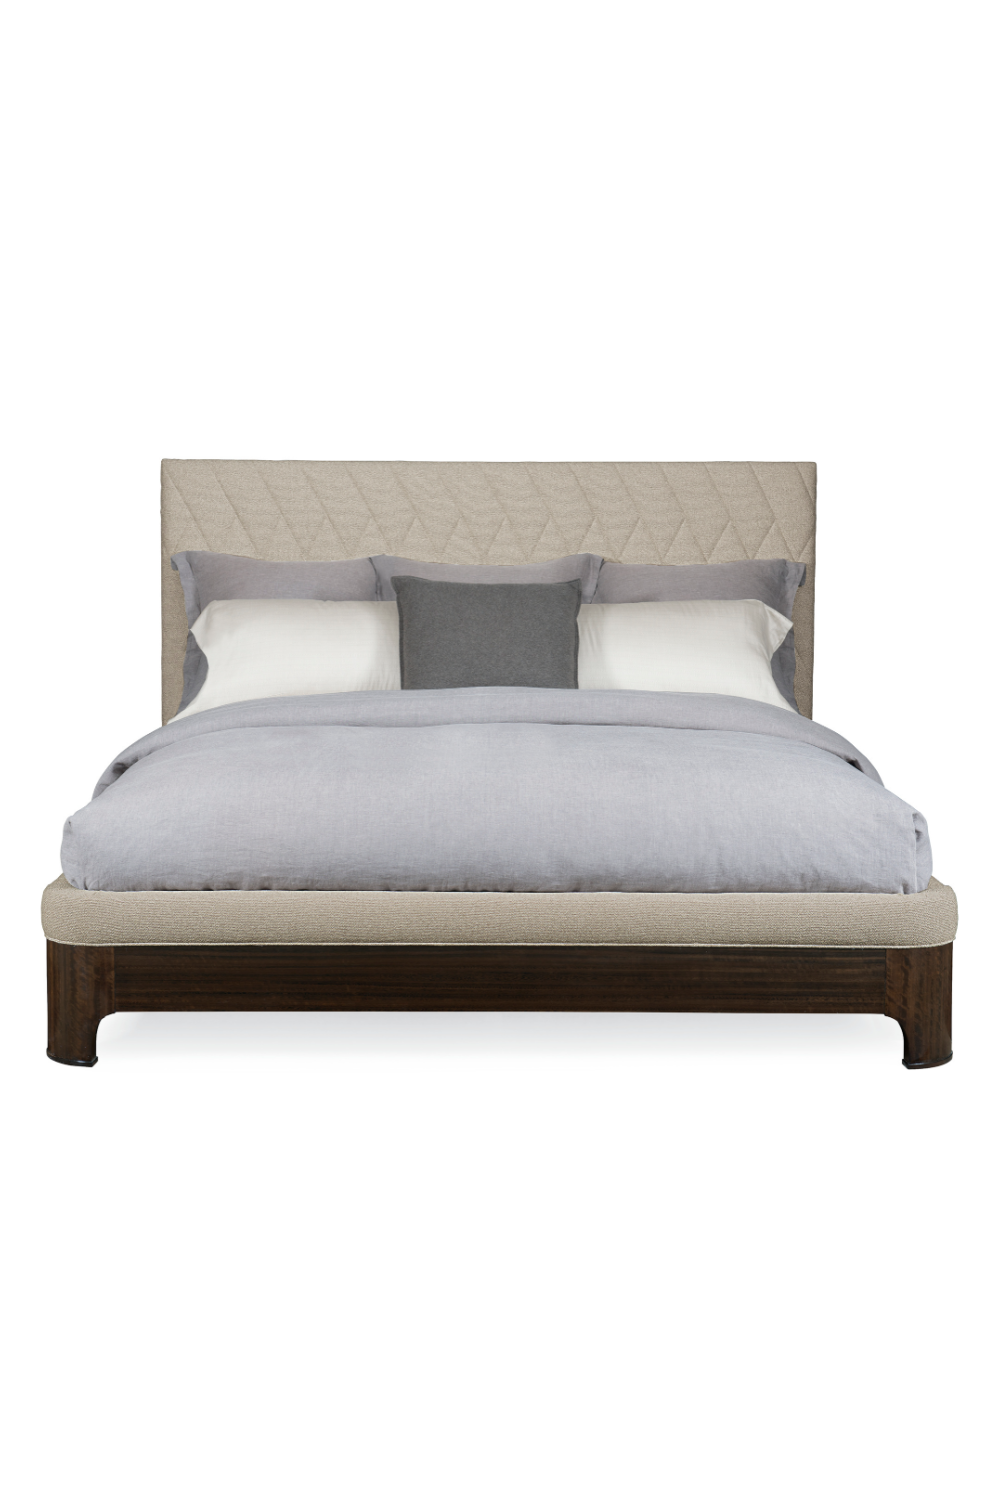 Neutral-Toned Quilted Bed | Caracole Moderne | Oroa.com